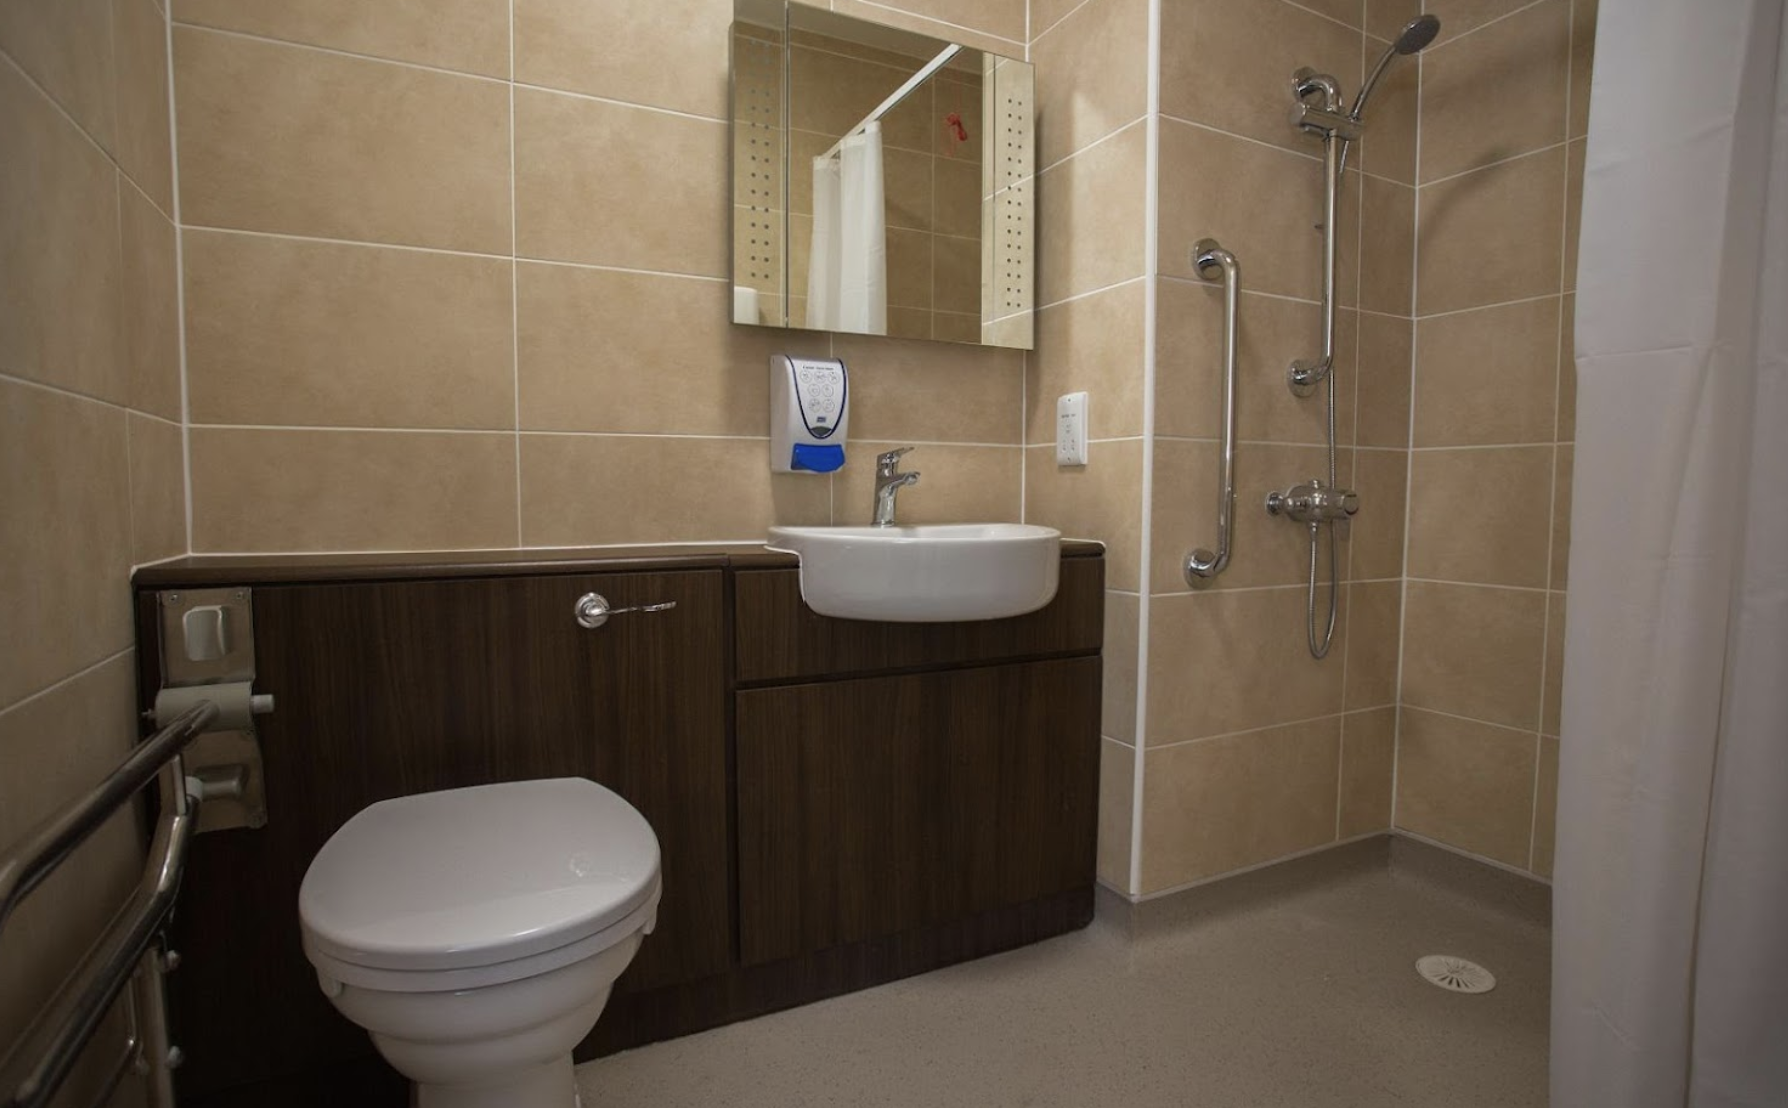 Bathroom of Ardenlea Court care home in Solihull, West Midlands